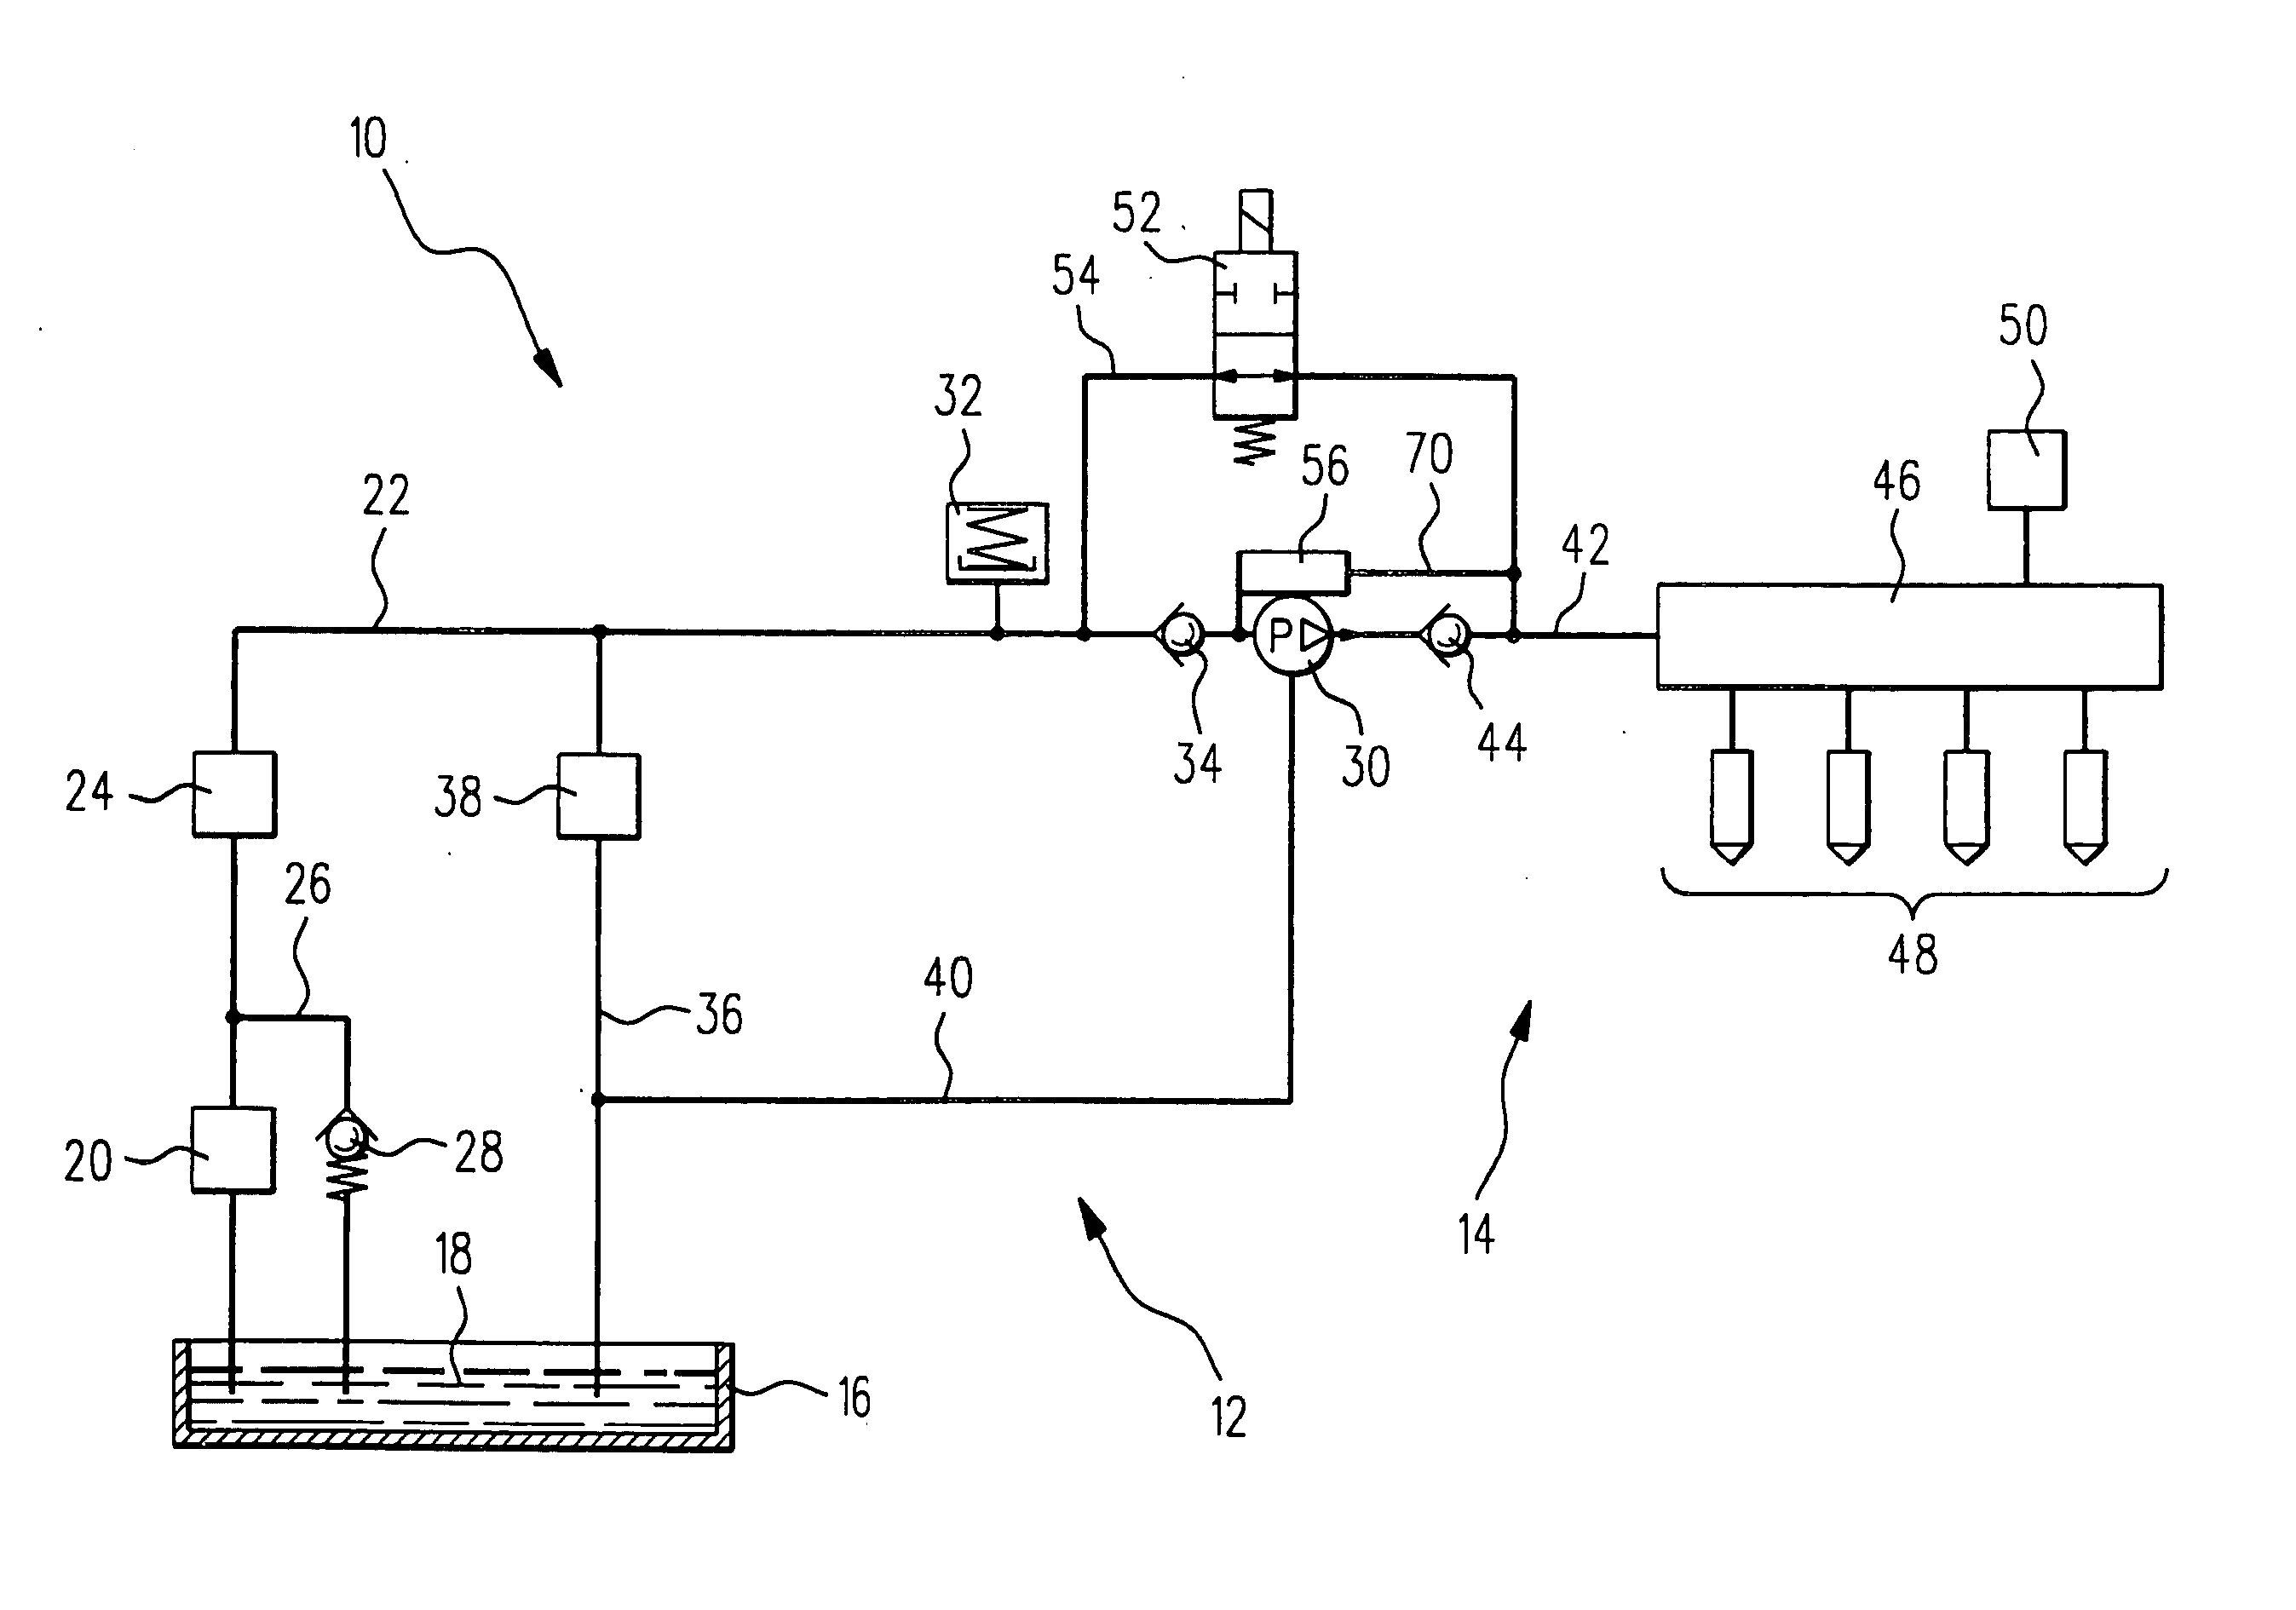 High-pressure fuel pump with a pressure relief valve